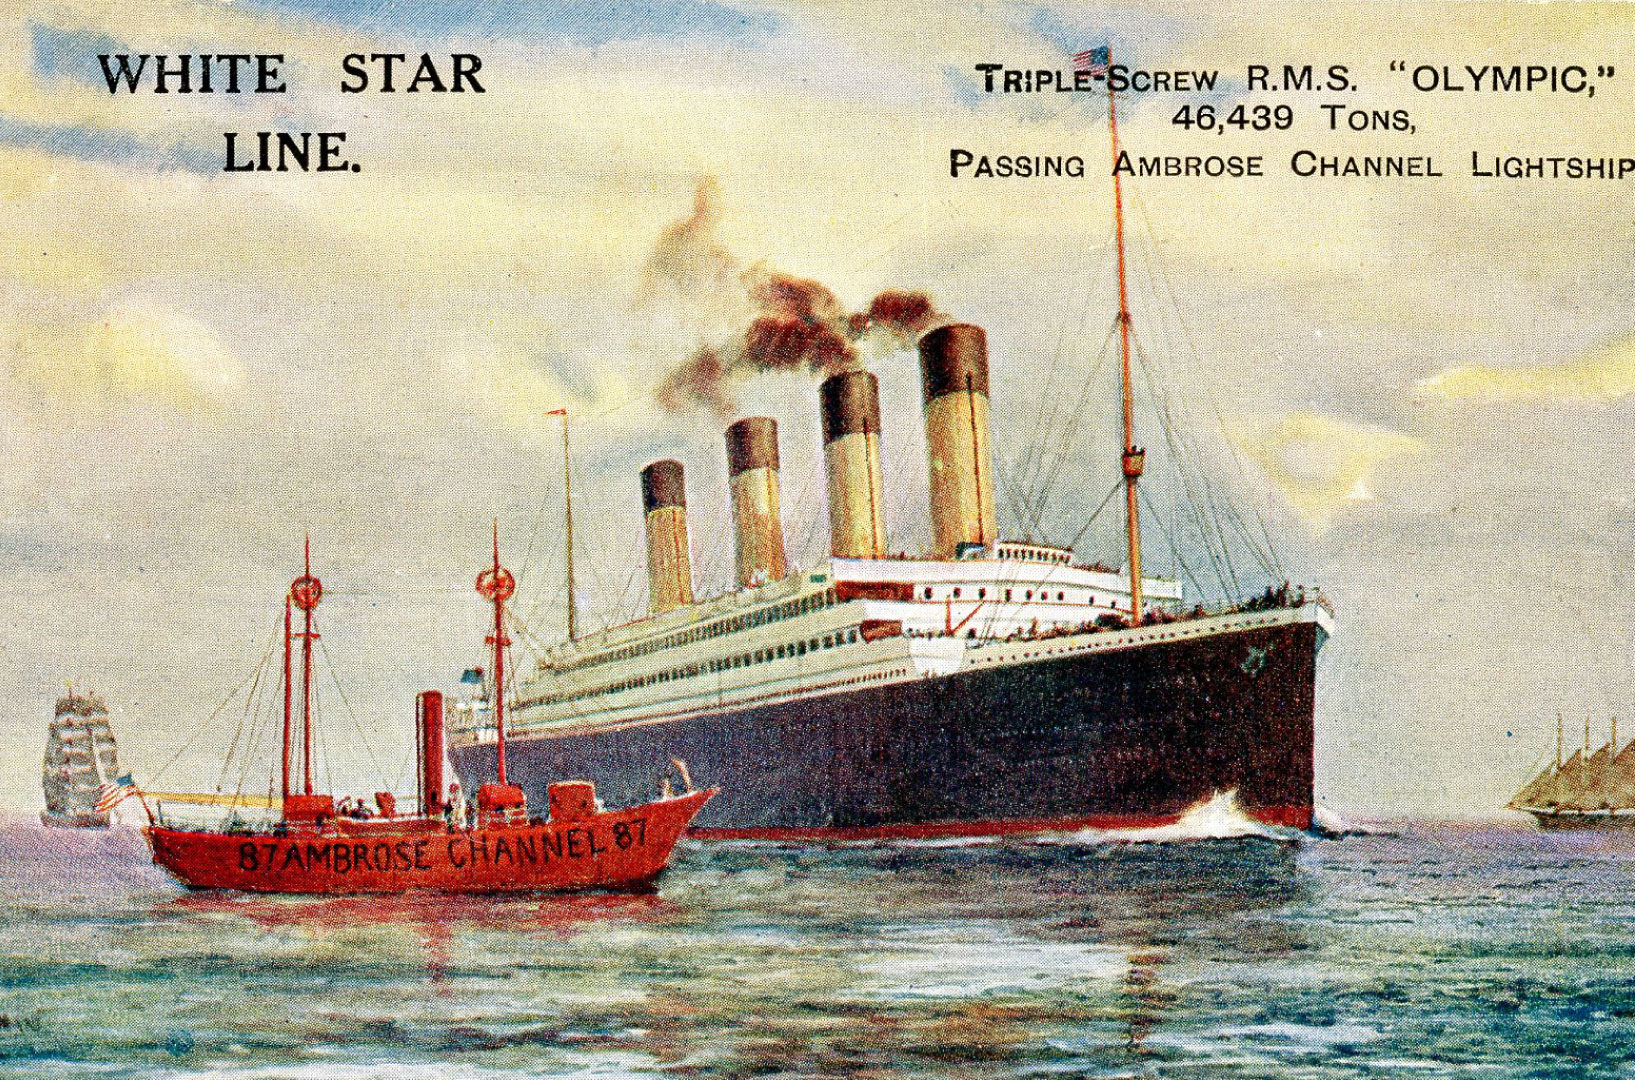 Beyond Titanic: Travel and Immigration in the Era of Ocean Liners